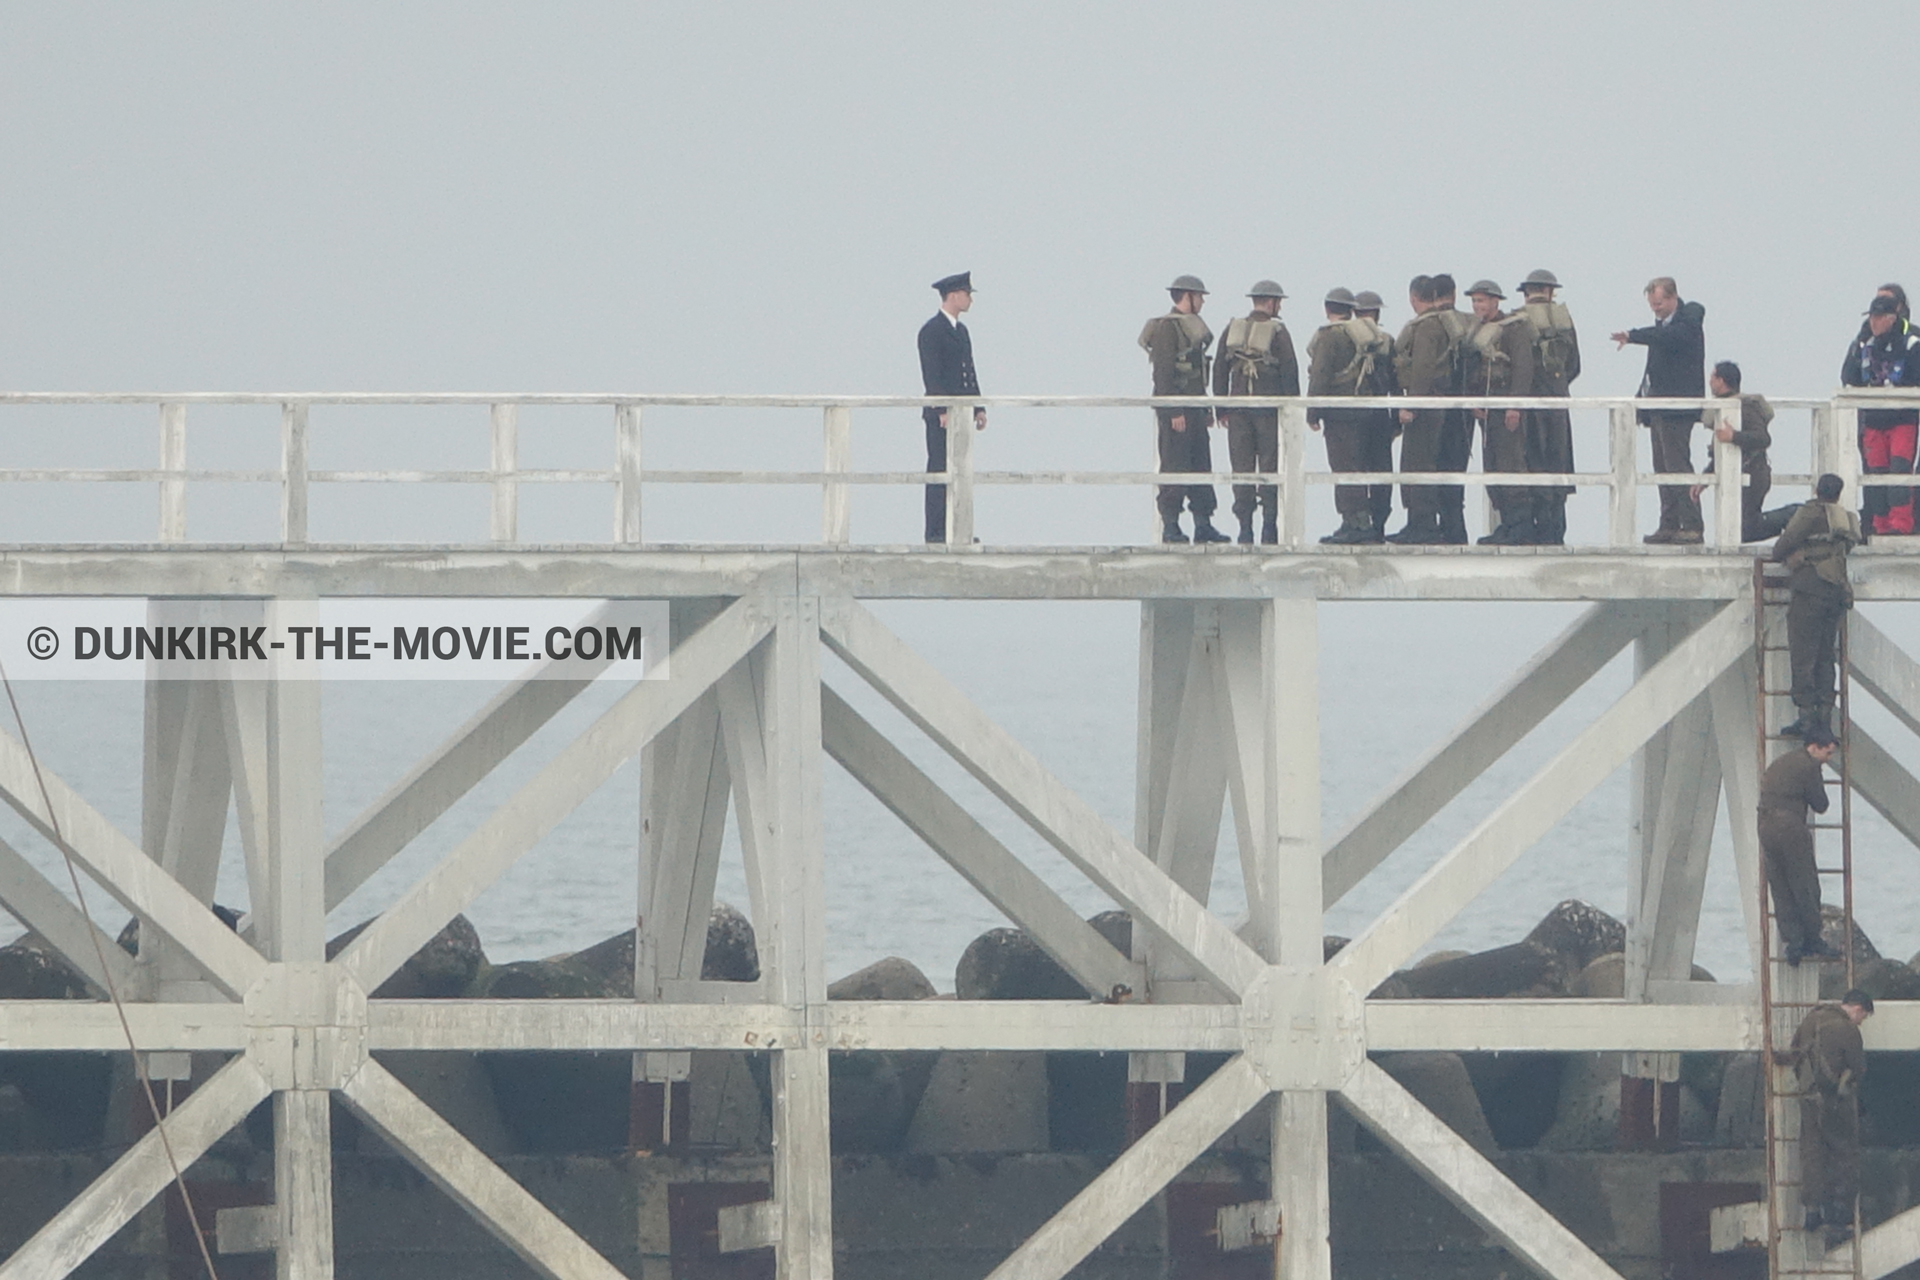 Picture with actor, grey sky, supernumeraries, EST pier, Christopher Nolan, technical team,  from behind the scene of the Dunkirk movie by Nolan